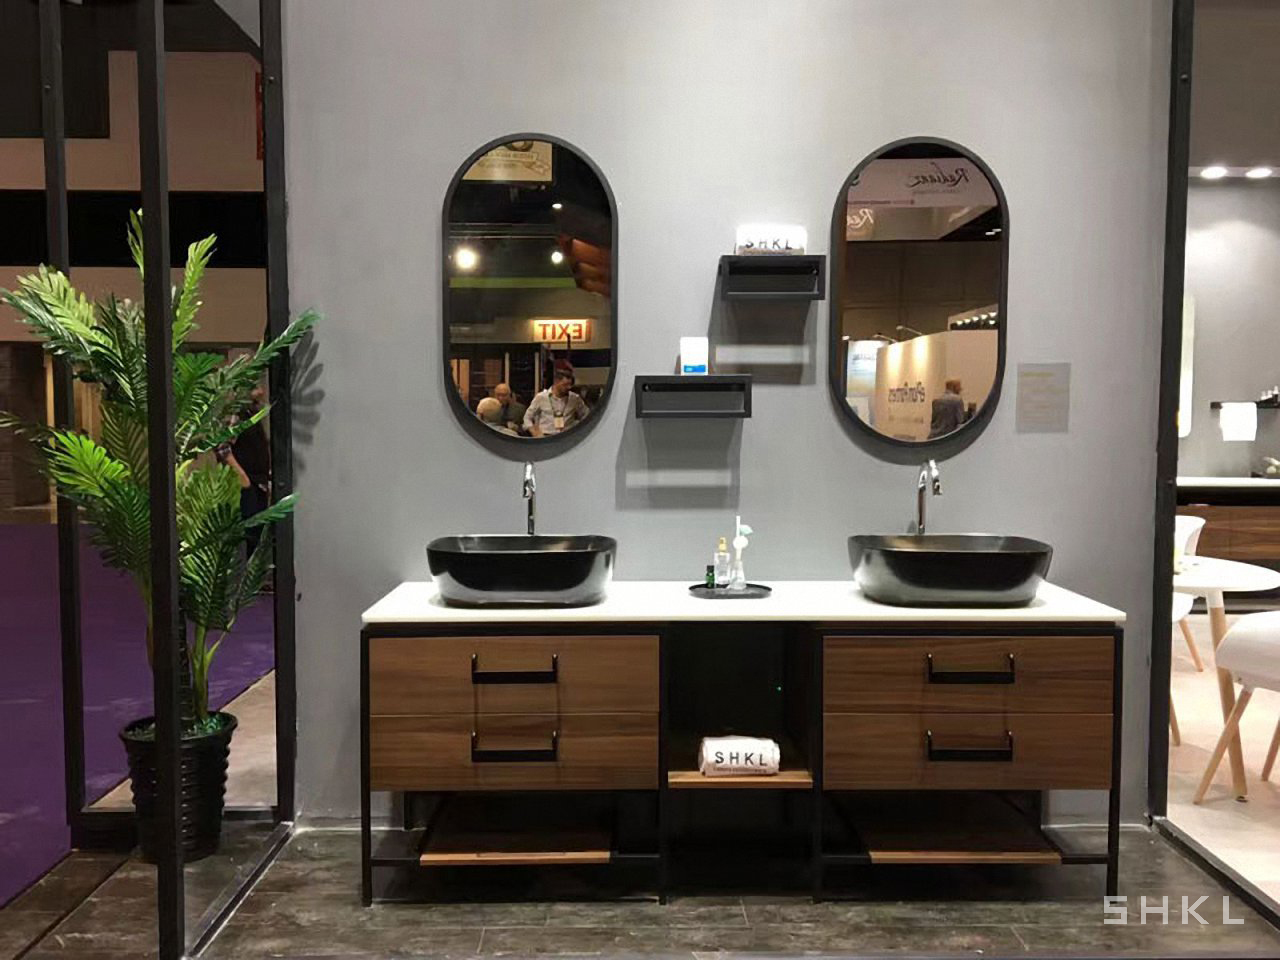 KBIS 2018, SHKL attended KBIS the 2nd time, leading the trend of bathroom vanities 5